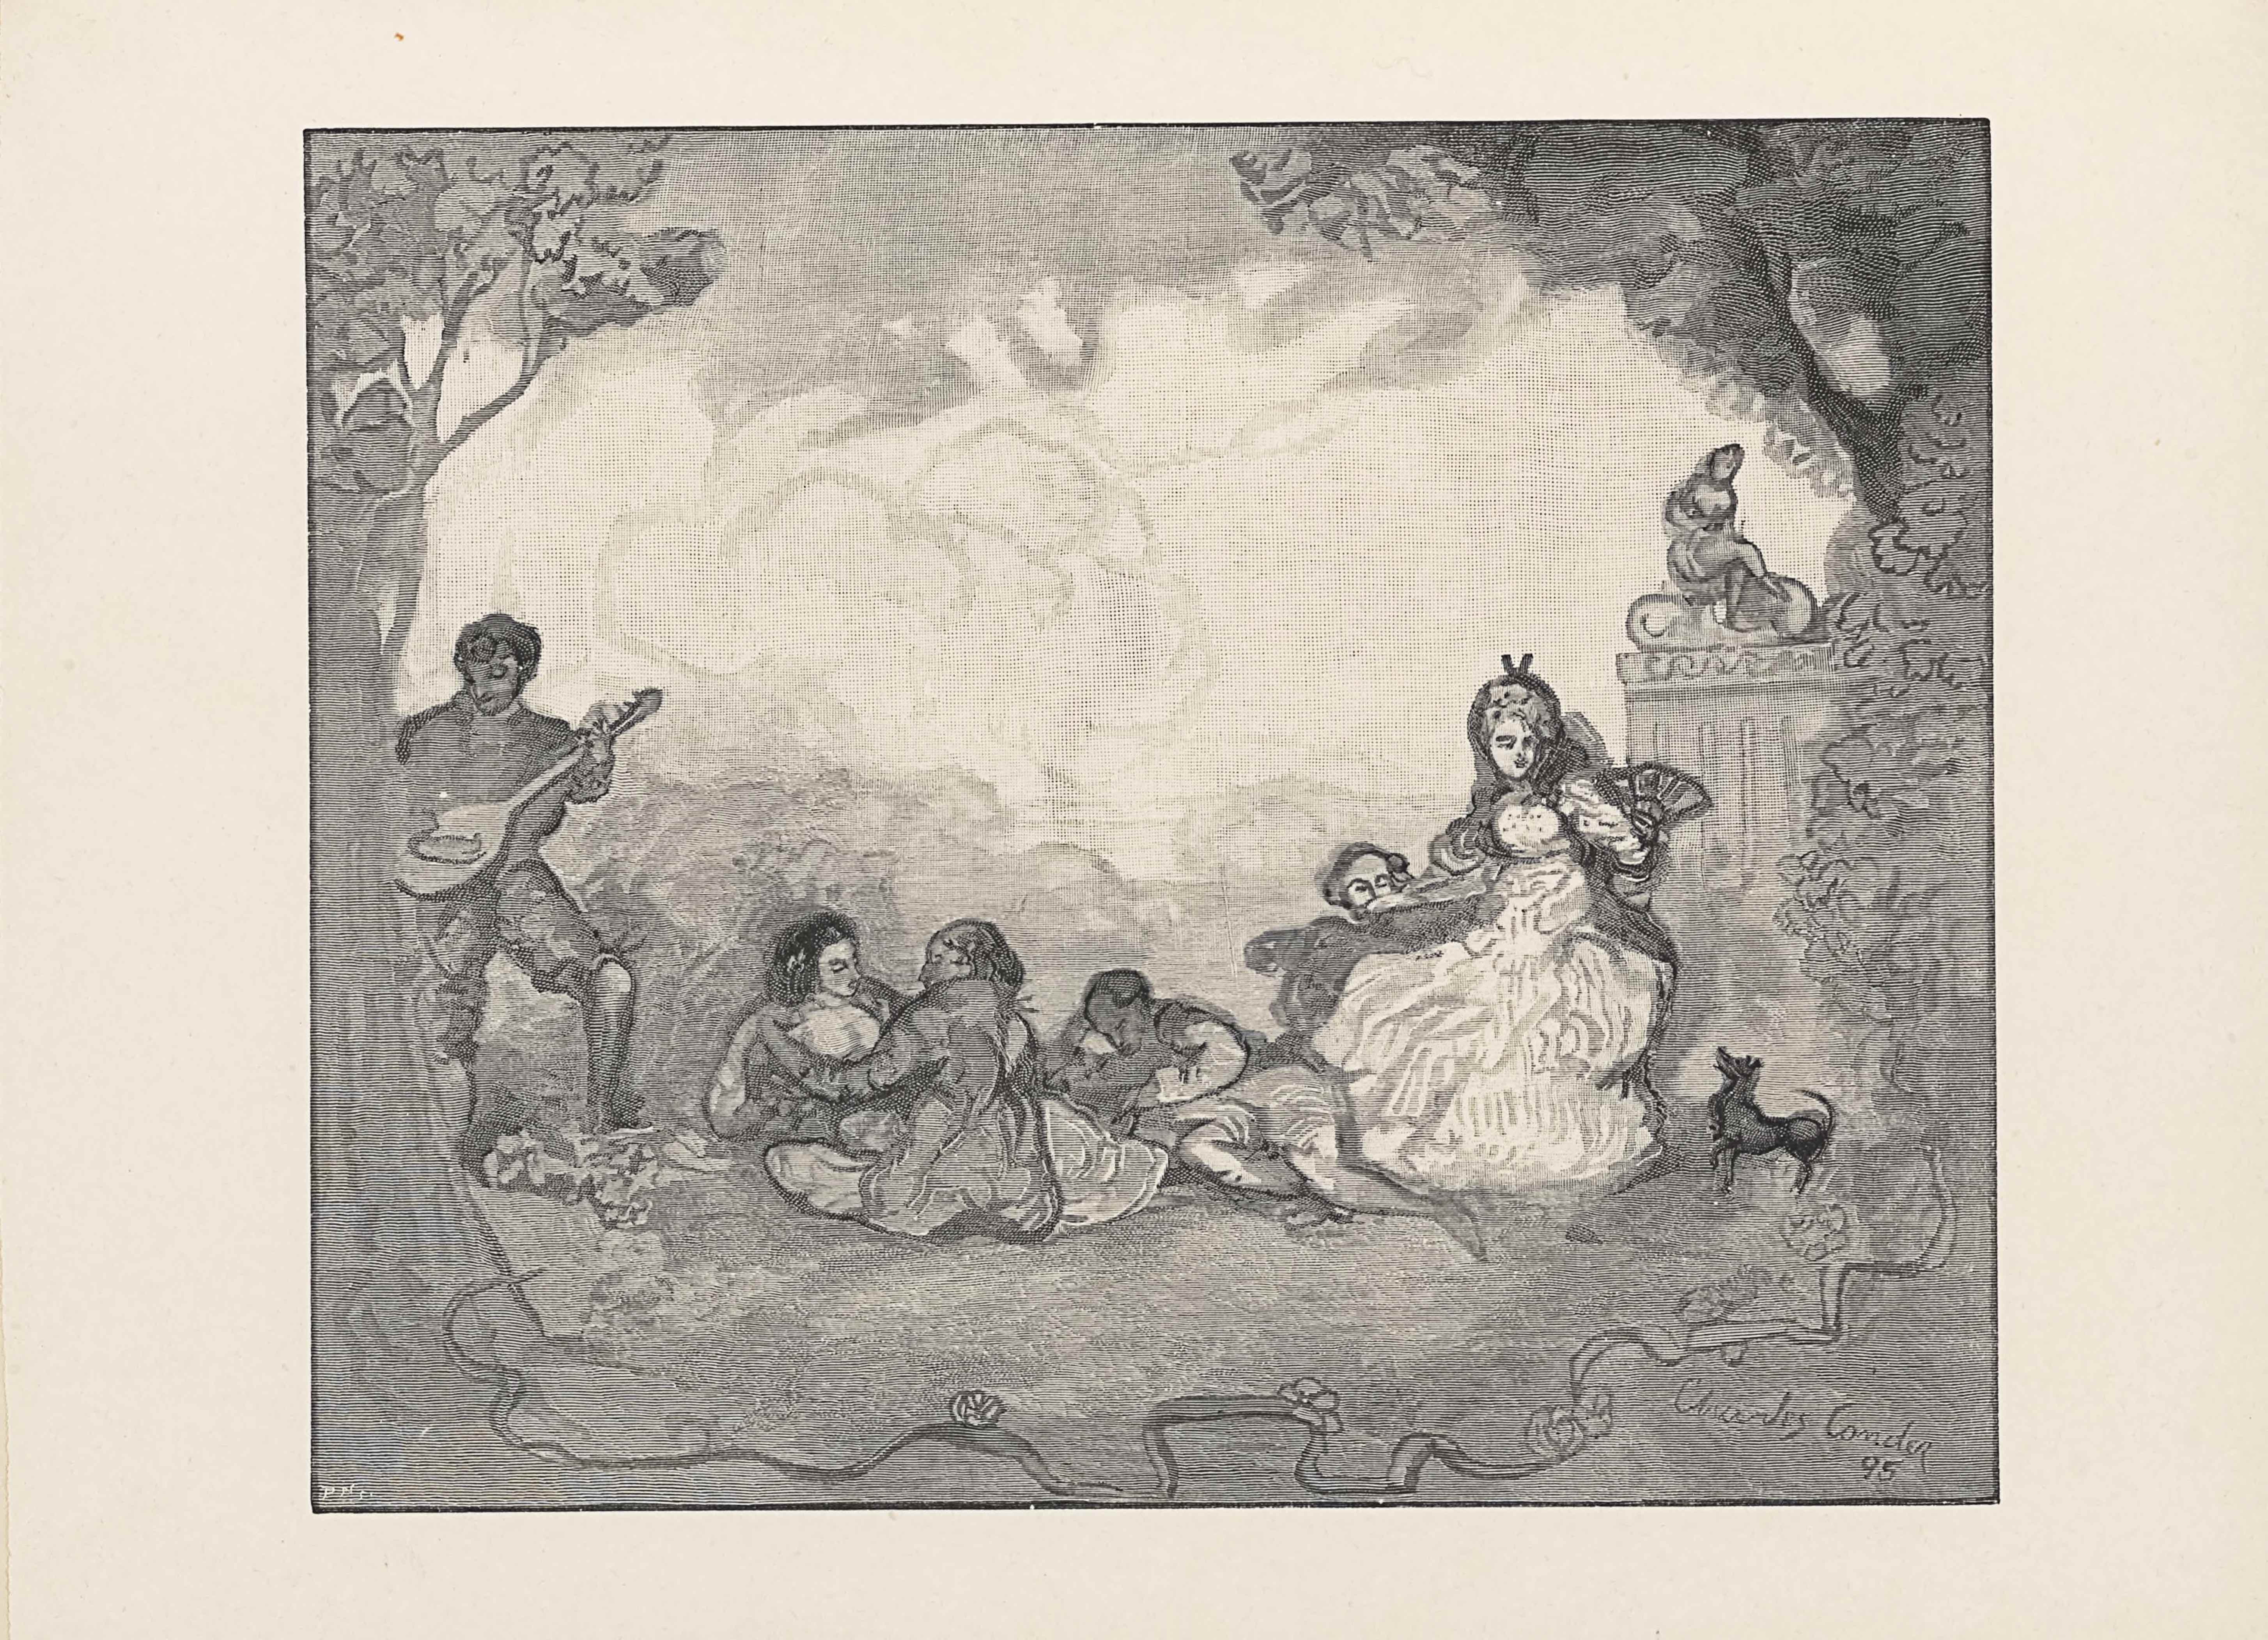 The wood engraving from a water colour drawing is presented in landscape orientation. A single-lined rectangular border outlines a scene filled with six people in a forest. In the foreground is a curved line that looks like a tree root crossing from the left to the right side of the image with flowers budding intermittently. A tree grows up the left side of the image, half in view of the frame. In the mid-ground appear the six people. Immediately to the right of the tree on the left side of the page is a man standing and playing the mandoline, plainly clothed in a long-sleeve shirt, breeches, and bare feet. To the right of him are a man and a woman facing and holding one another while seated on the ground. The man appears to be shirtless, with the rest of his body blocked by the woman who leans forward in a long dress, with her back to the viewer. On the right side of them is a man leaned back on his right elbow looking at a book with his legs sprawled out. The last two figures are to the right of the reader. A man with only his head peeking out is behind a bench on which a woman is seated. She sits in a long white dress with a dark overcoat and hair flowing down around a hairpiece. She has a fan opened in her left hand and is poised to wave it. A small, black dog to the right of the woman looks up at her fan. In the background of the woman and dog on the far right of the page is a parthenon-style building with a female statue seated on the flat roof. A tree sprouts up behind and mid-ground bushes partially obstruct the right side of the building from view. In the central background and taking up the top third of the page is the faint outline of a mountainous landscape and a swirling, cloudy sky. The artist’s signature appears in the bottom right corner of the piece as: “Charles Conder” on a diagonal aiming down to the right. The text: “95” appears underneath the name but aligned to the right.